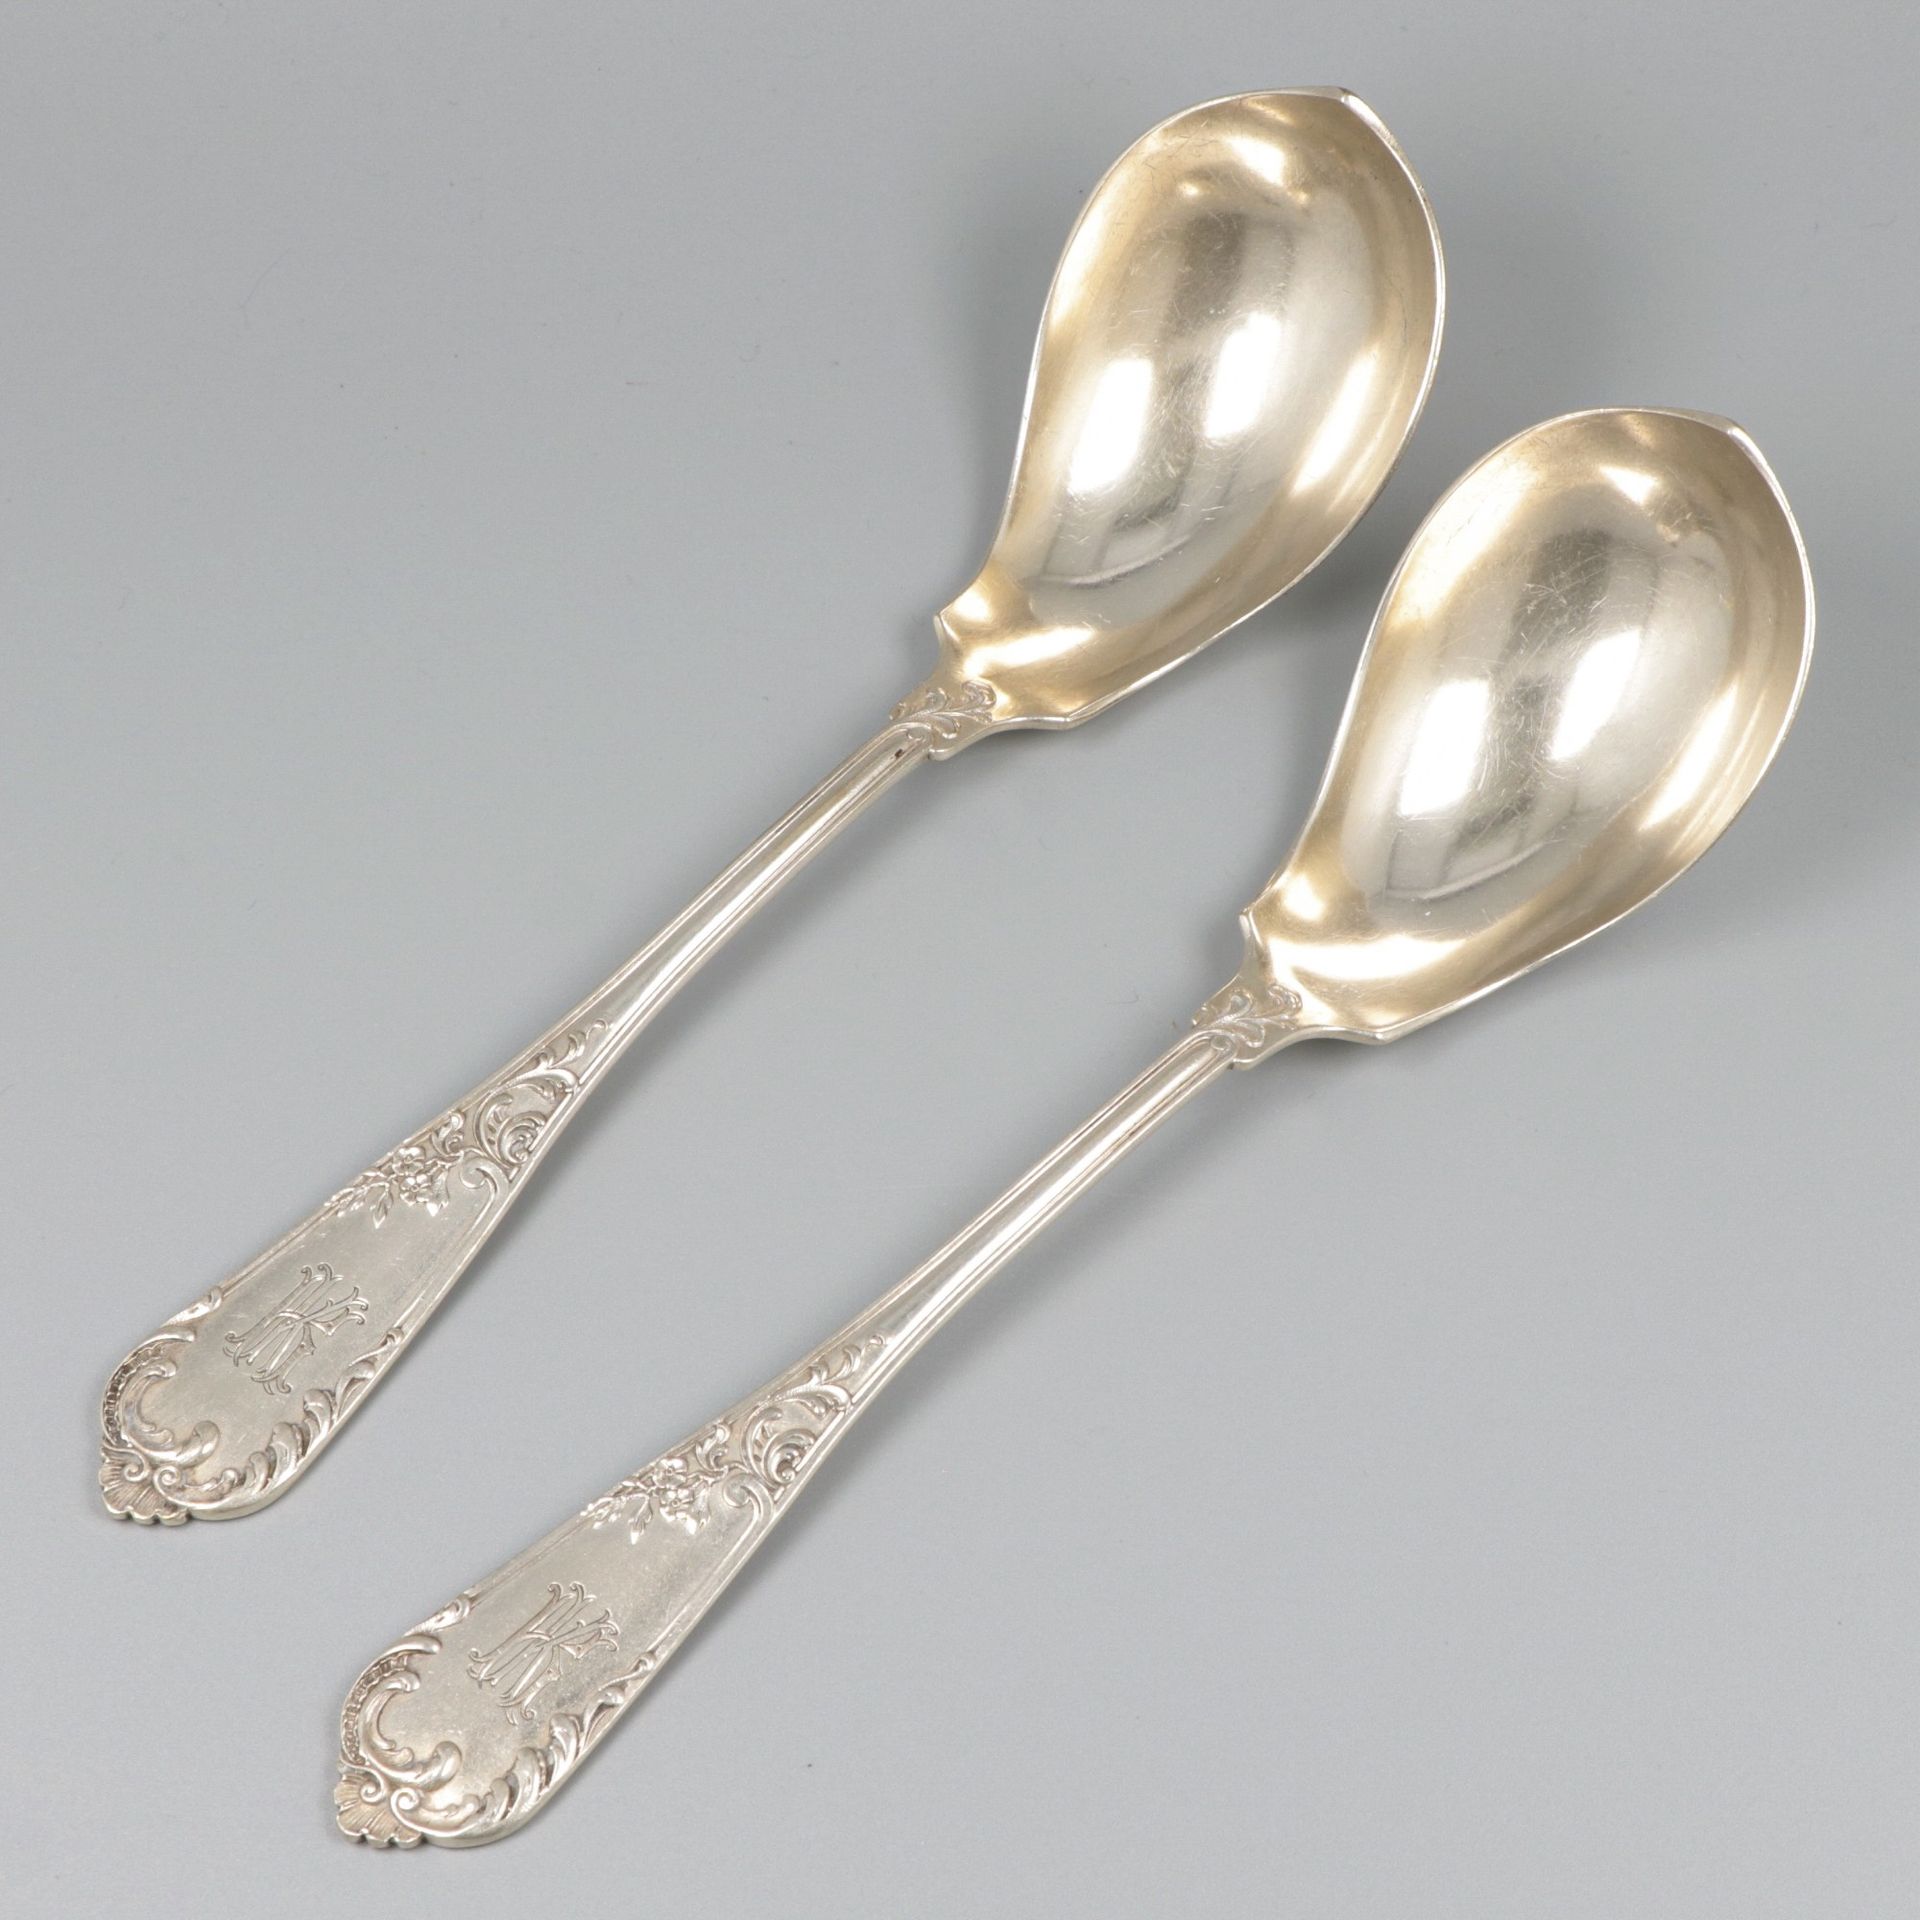 2-piece set of silver spoons. With floral decorations. Germany, early 20th centu&hellip;